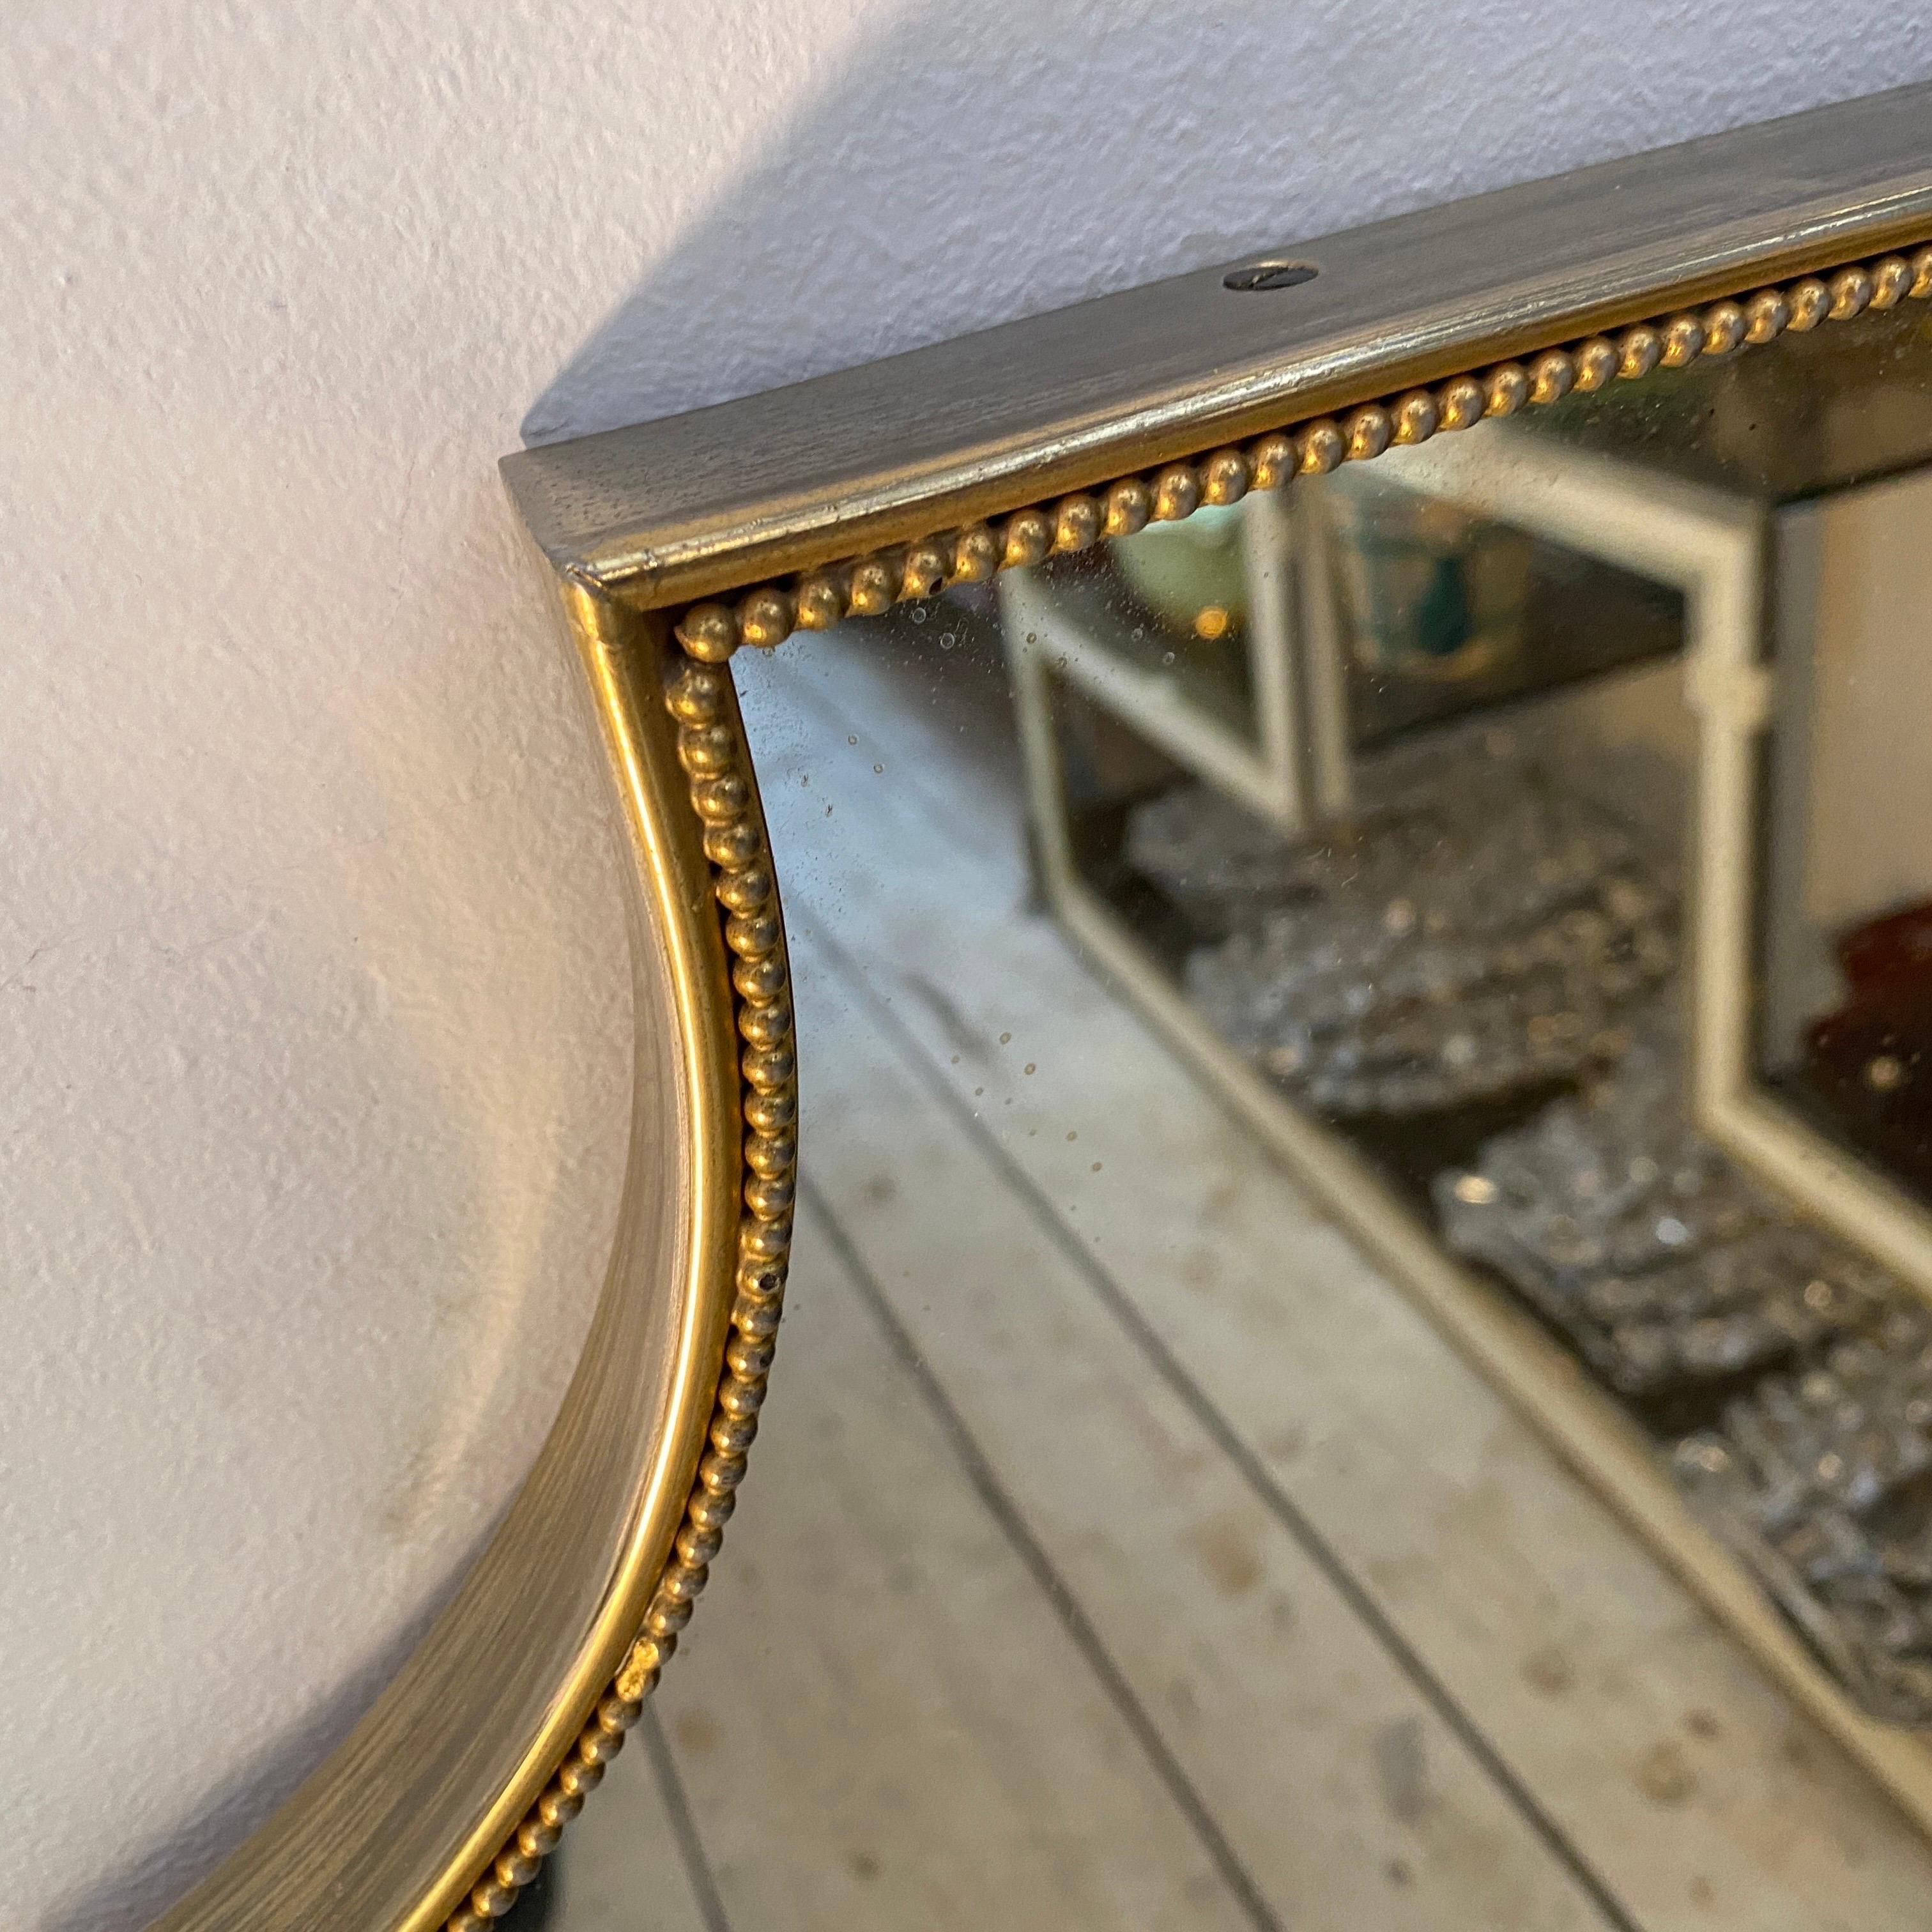 A Mid-Century Modern brass Italian mirror designed and manufactured in Italy in the Sixties in the style of Gio Ponti in very good conditions overall that have a sleek and elegant design with clean lines and a Minimalist aesthetic. It has a shield